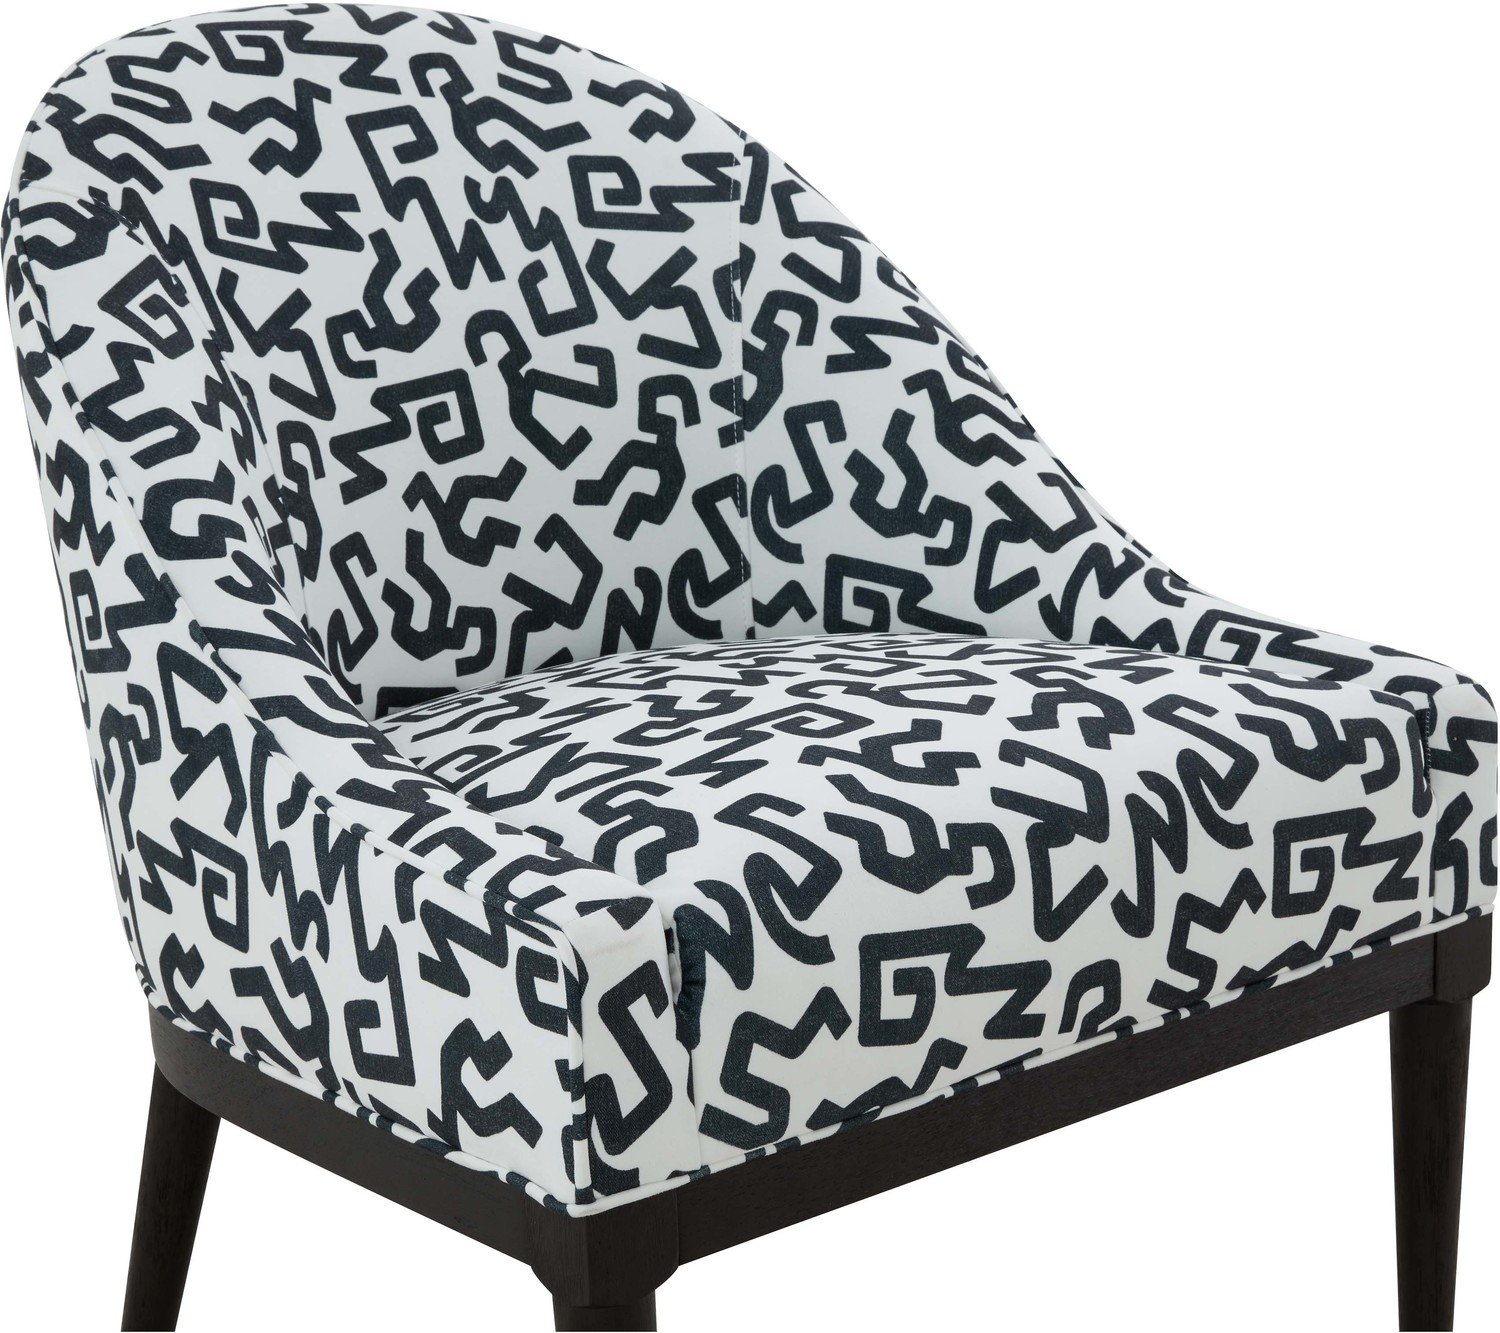 velvet statement chair Contemporary Design Furniture Accent Chairs Black and White